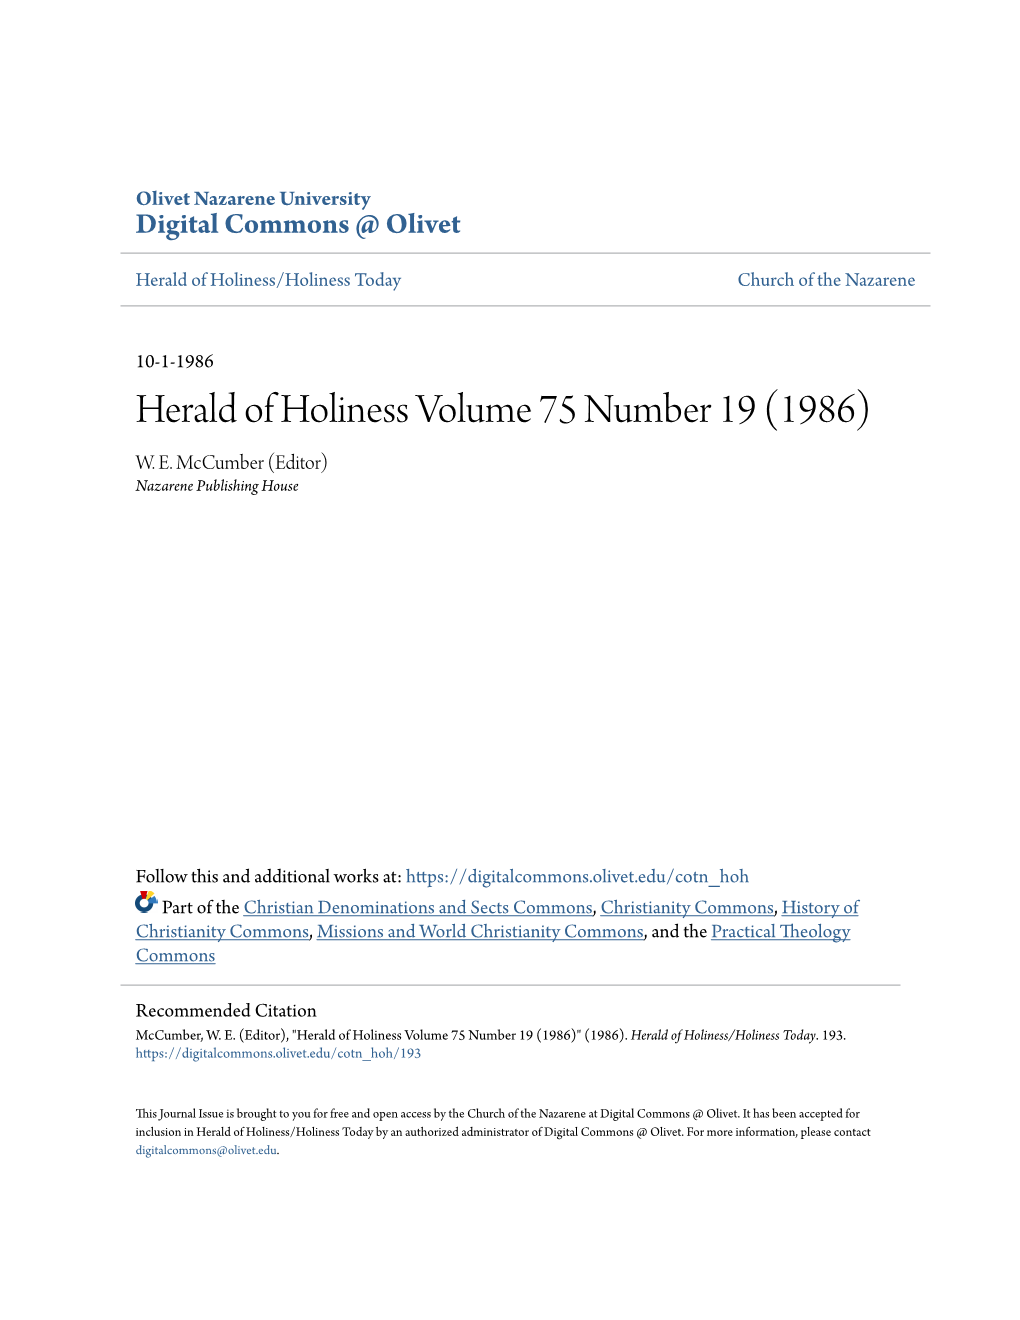 Herald of Holiness Volume 75 Number 19 (1986) W